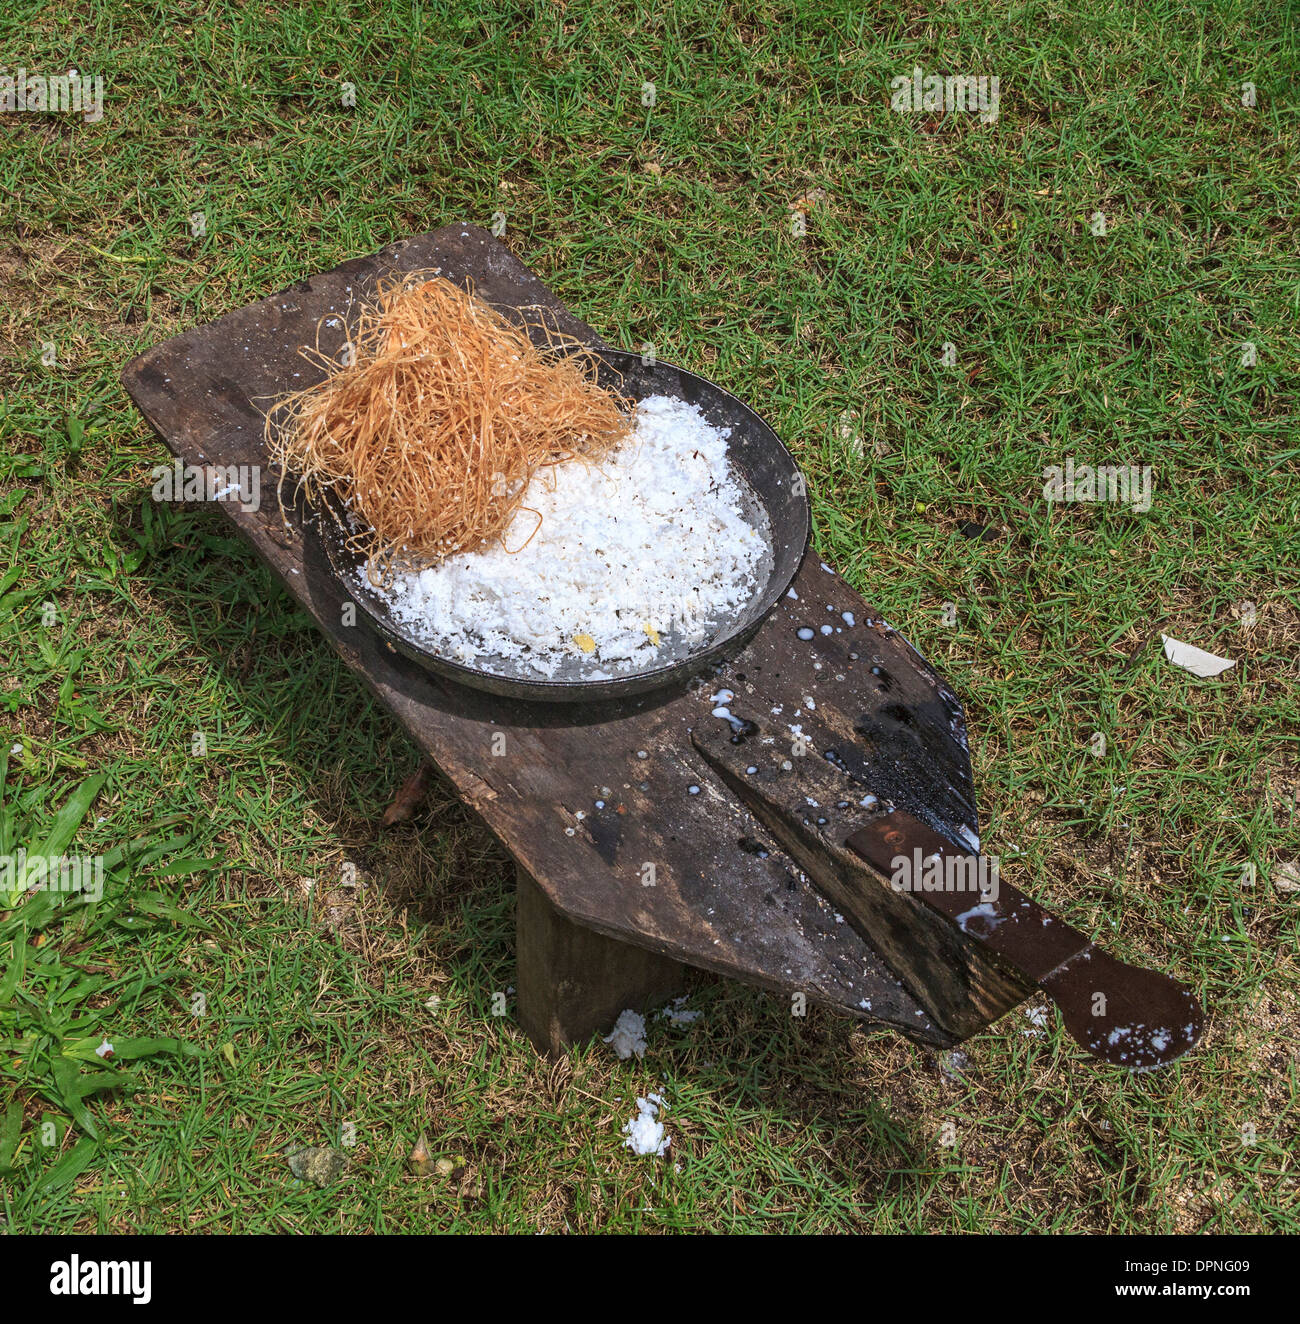 Freshly shredded coconut along with hibiscus tree fiber sitting on traditional tool used to shred coconut in Micronesia. Stock Photo